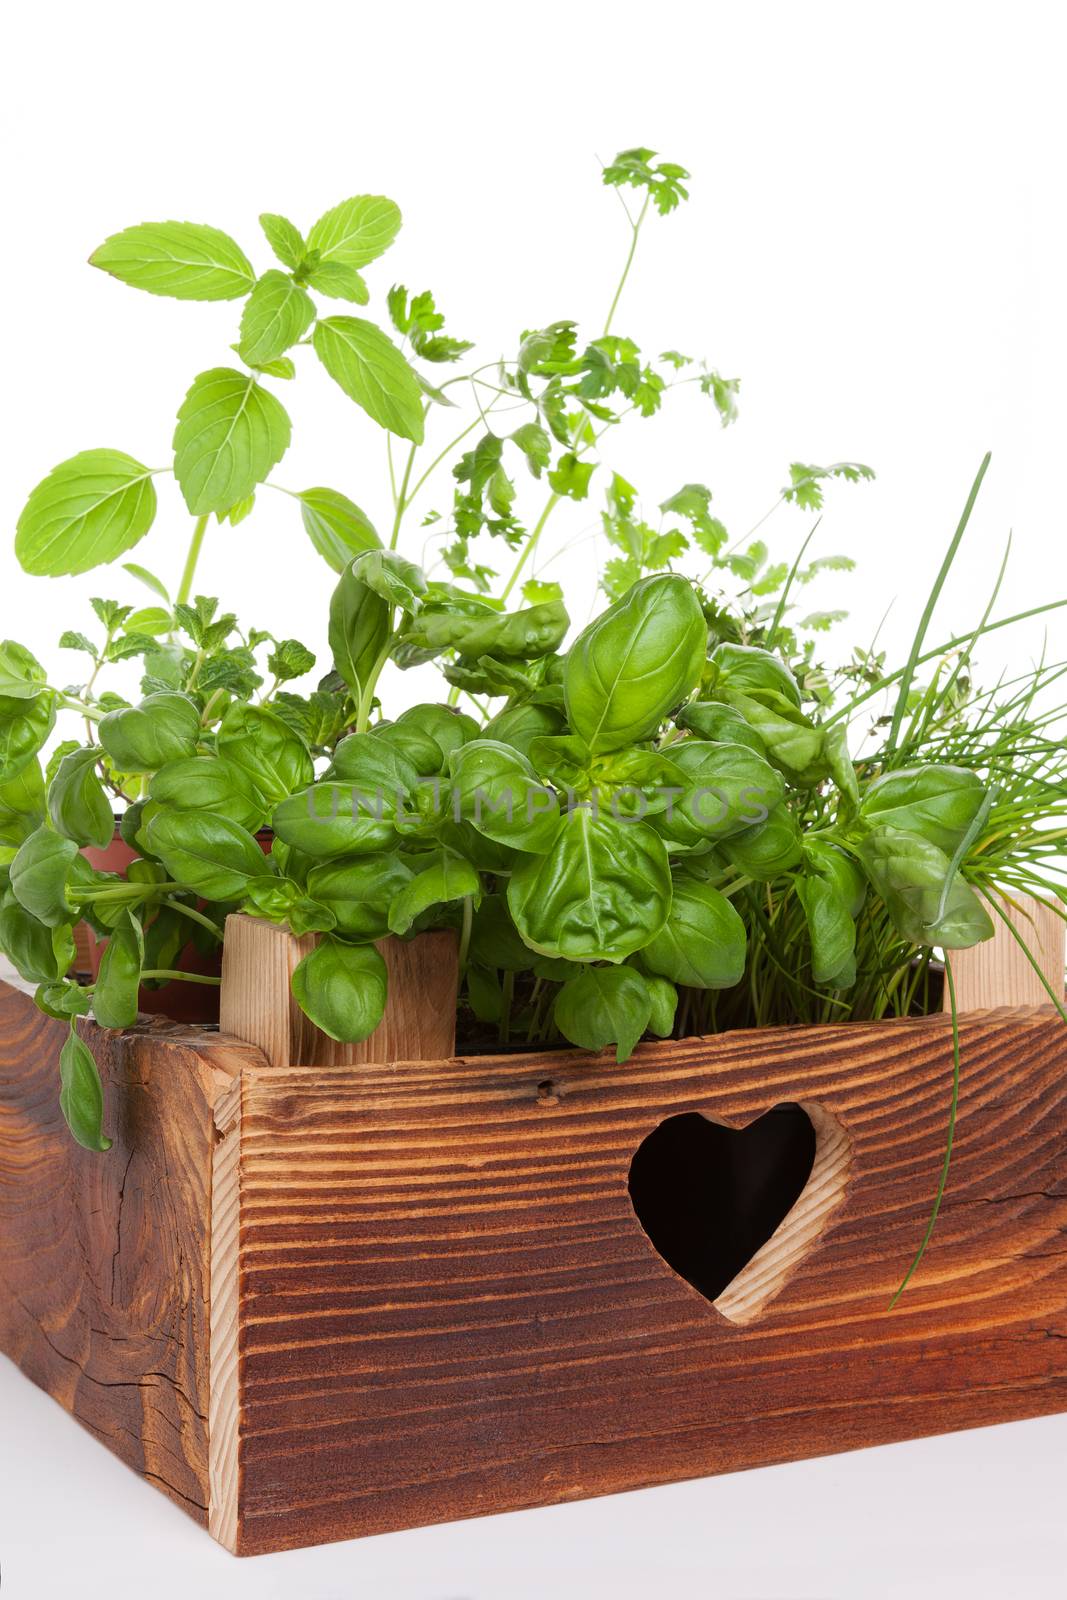 Herbs in wooden crate. by eskymaks